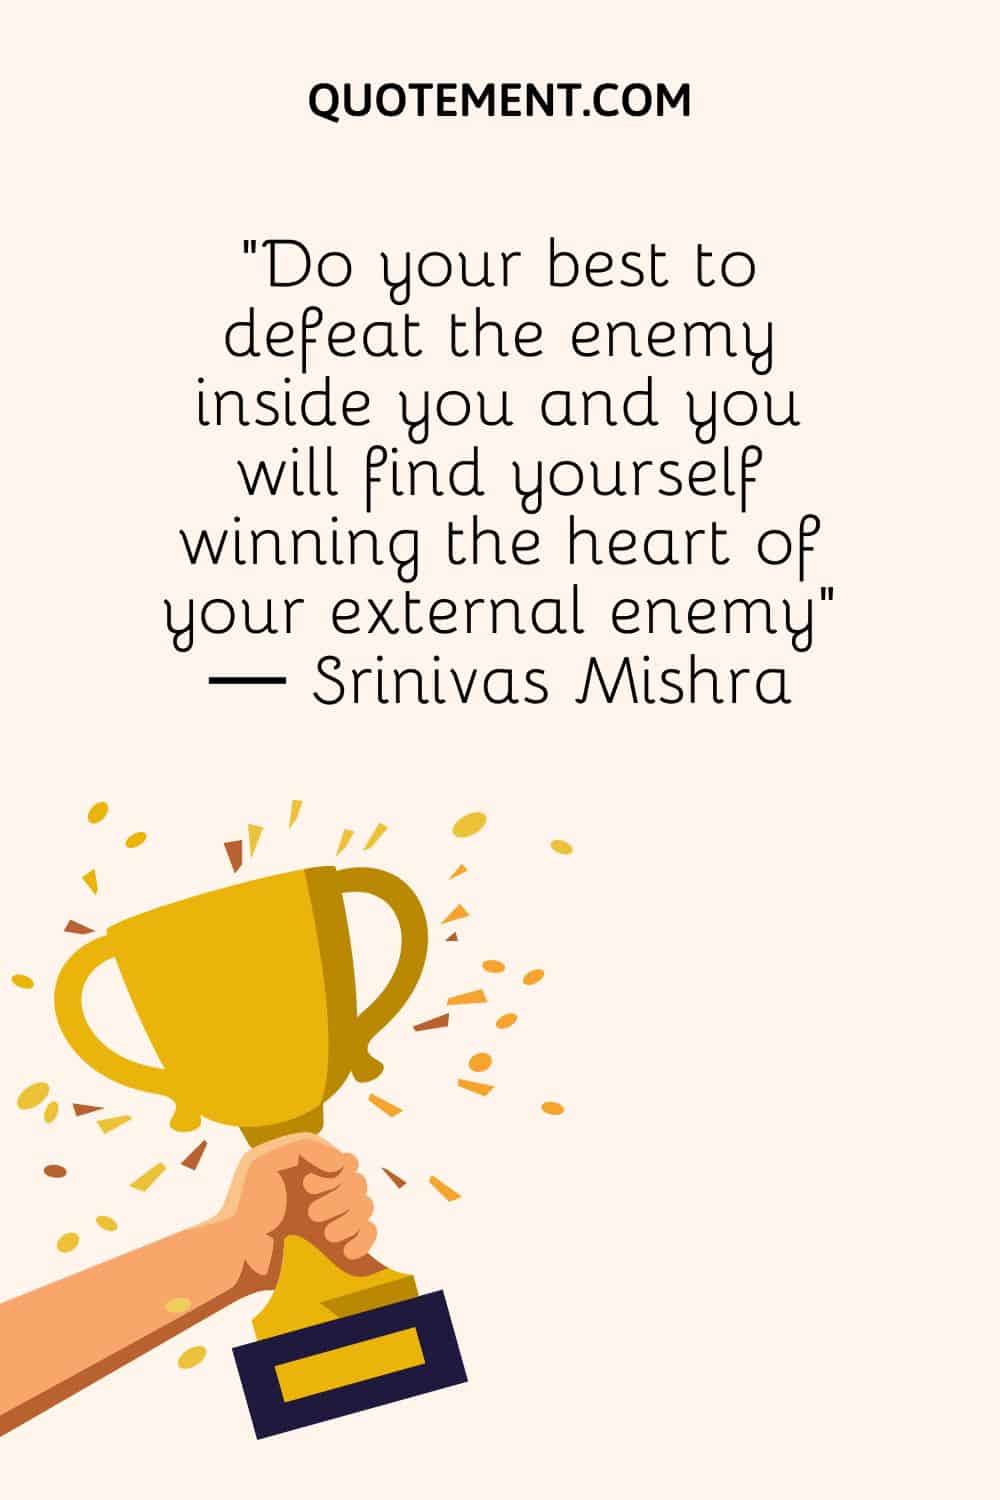 “Do your best to defeat the enemy inside you and you will find yourself winning the heart of your external enemy” ― Srinivas Mishra